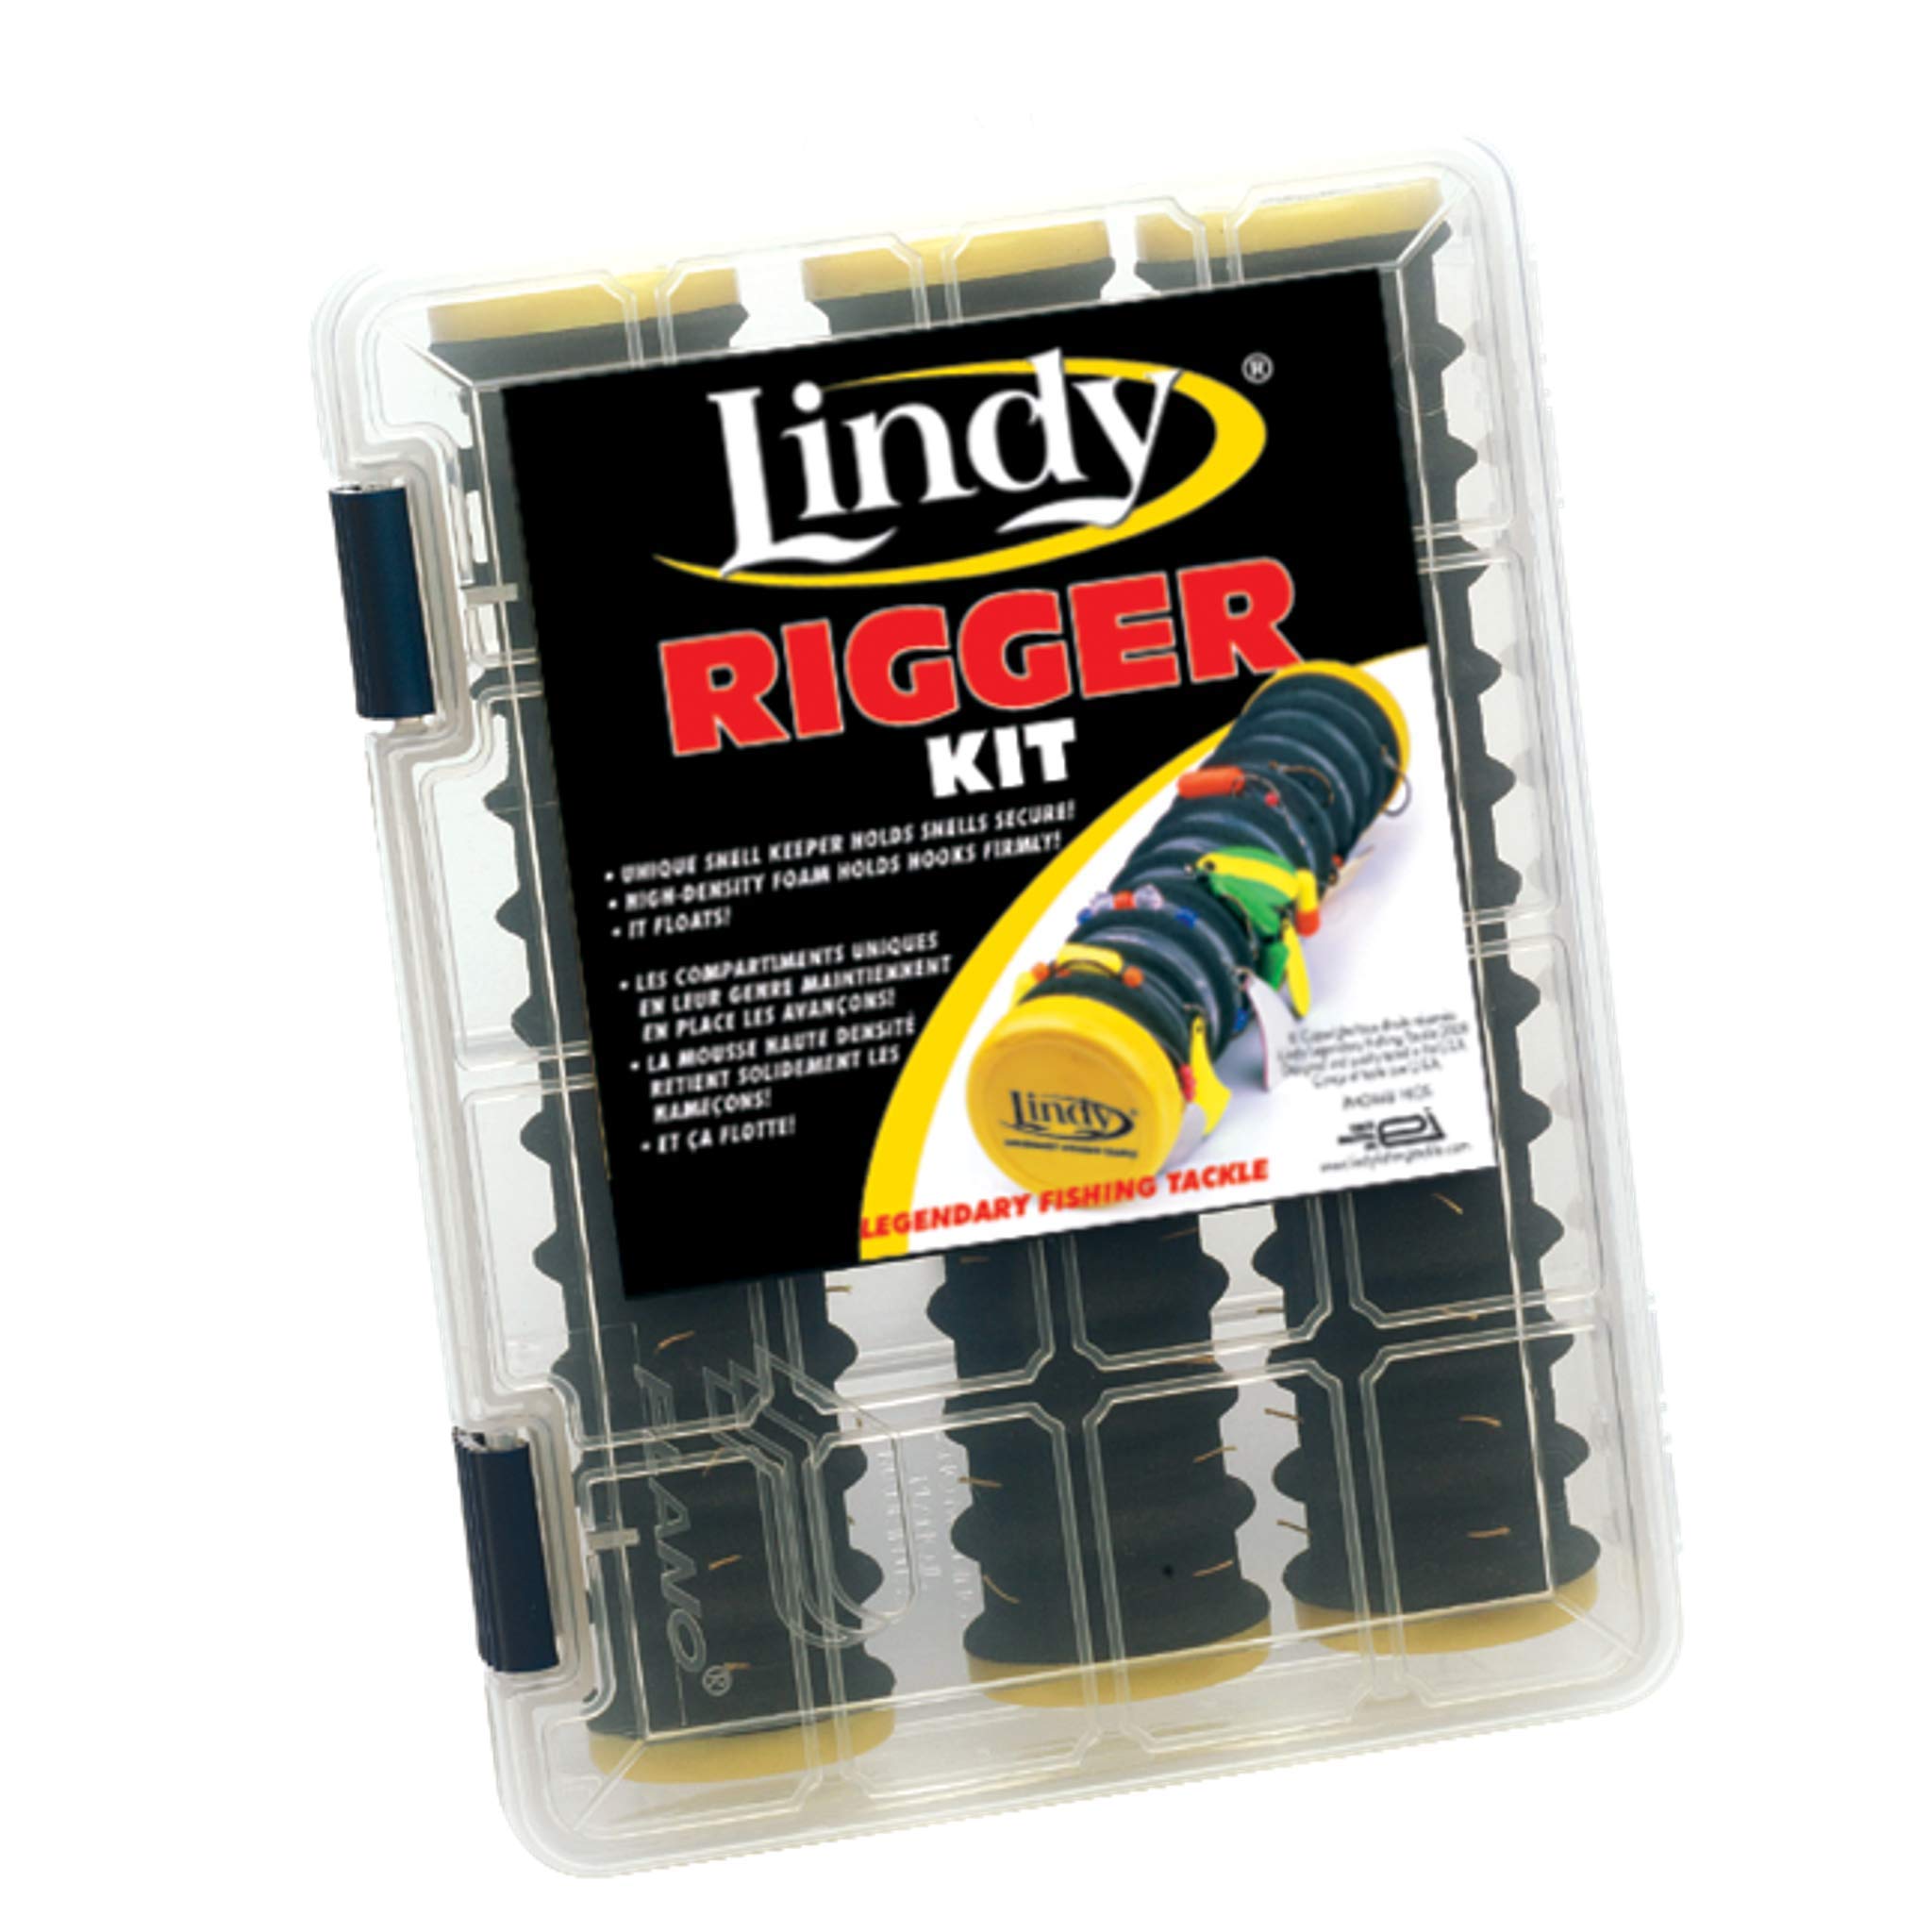 Lindy Rigger for Walleye Fishing - Keeps Snells and Rigs Organized